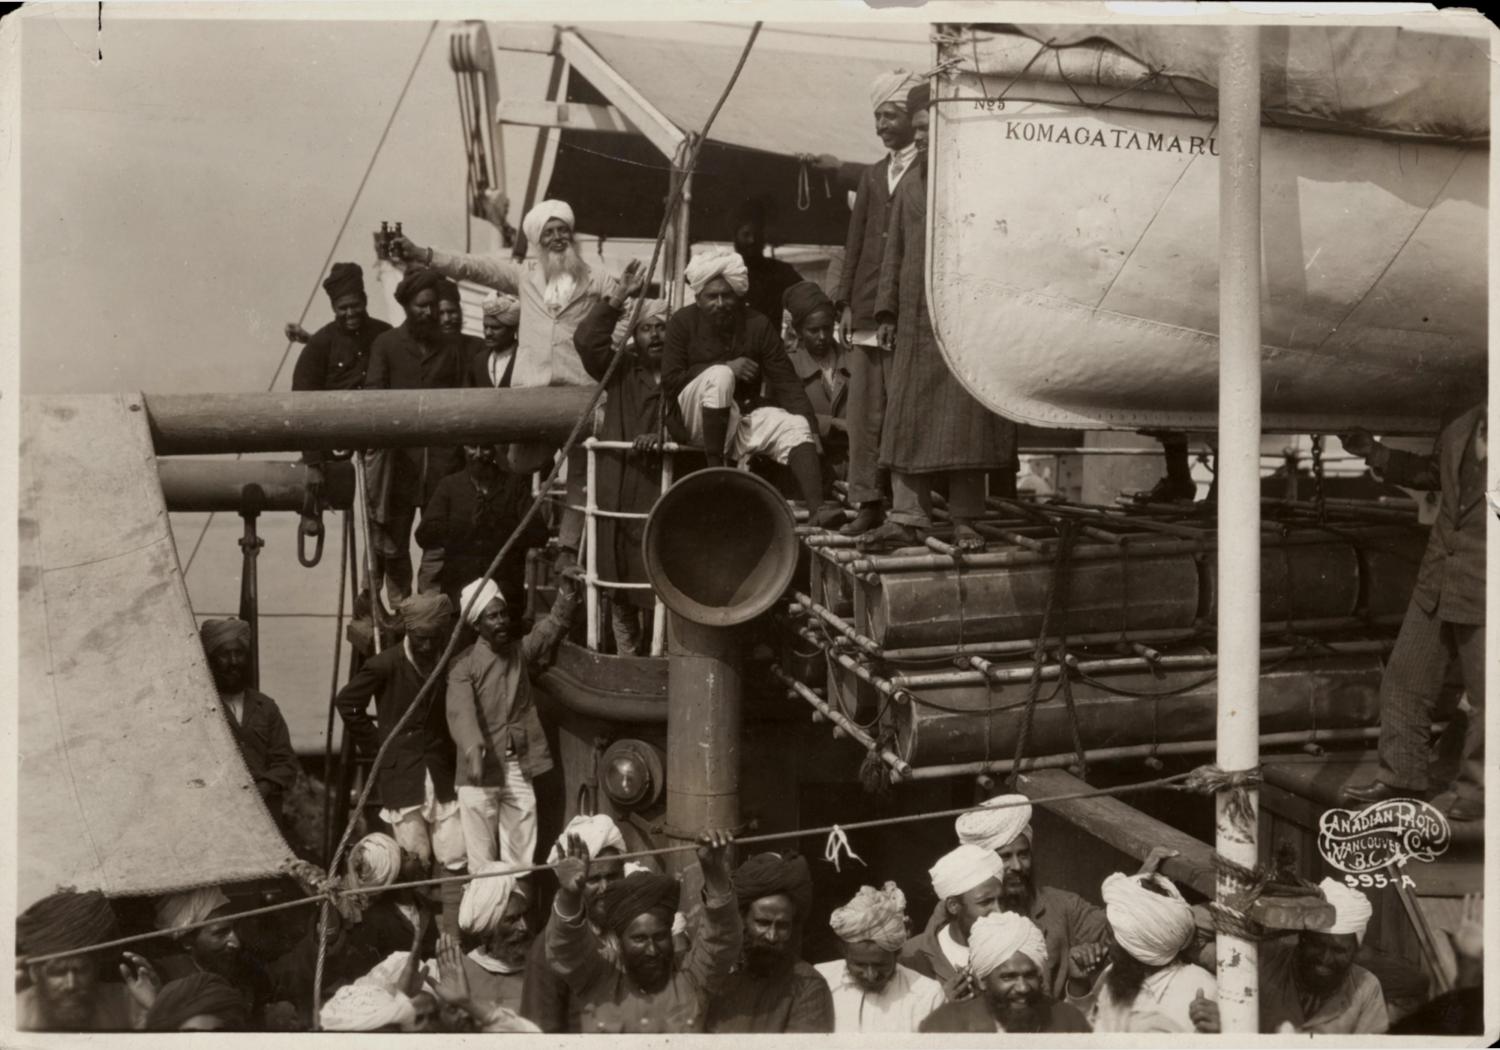 Sikh people aboard ship, 'Komagata Maru' - Gurdit Singh with white beard and light coloured suit